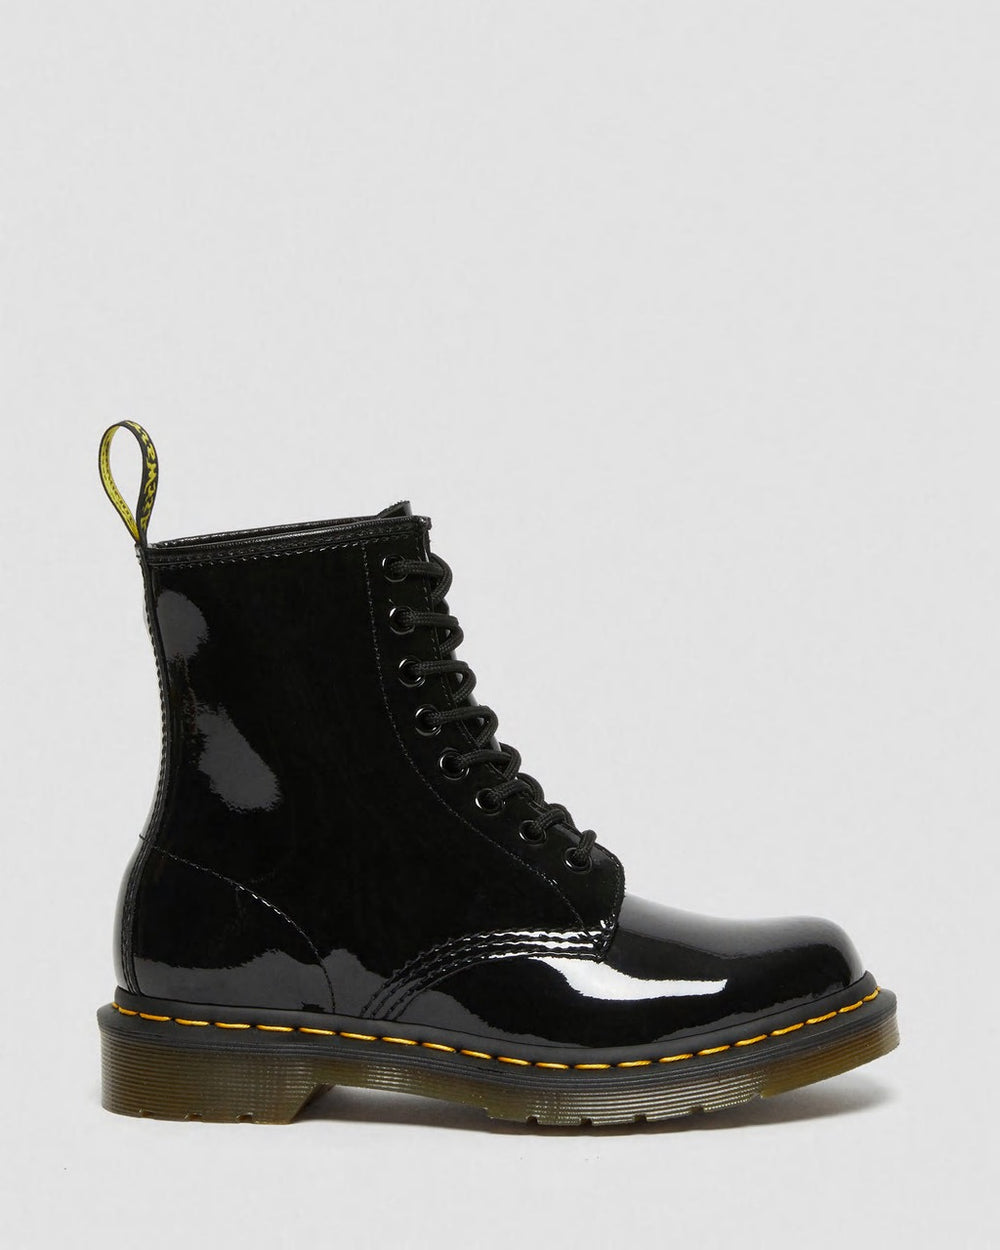 Dr. Martens 1460 Women's Patent Leather Lace Up Boots